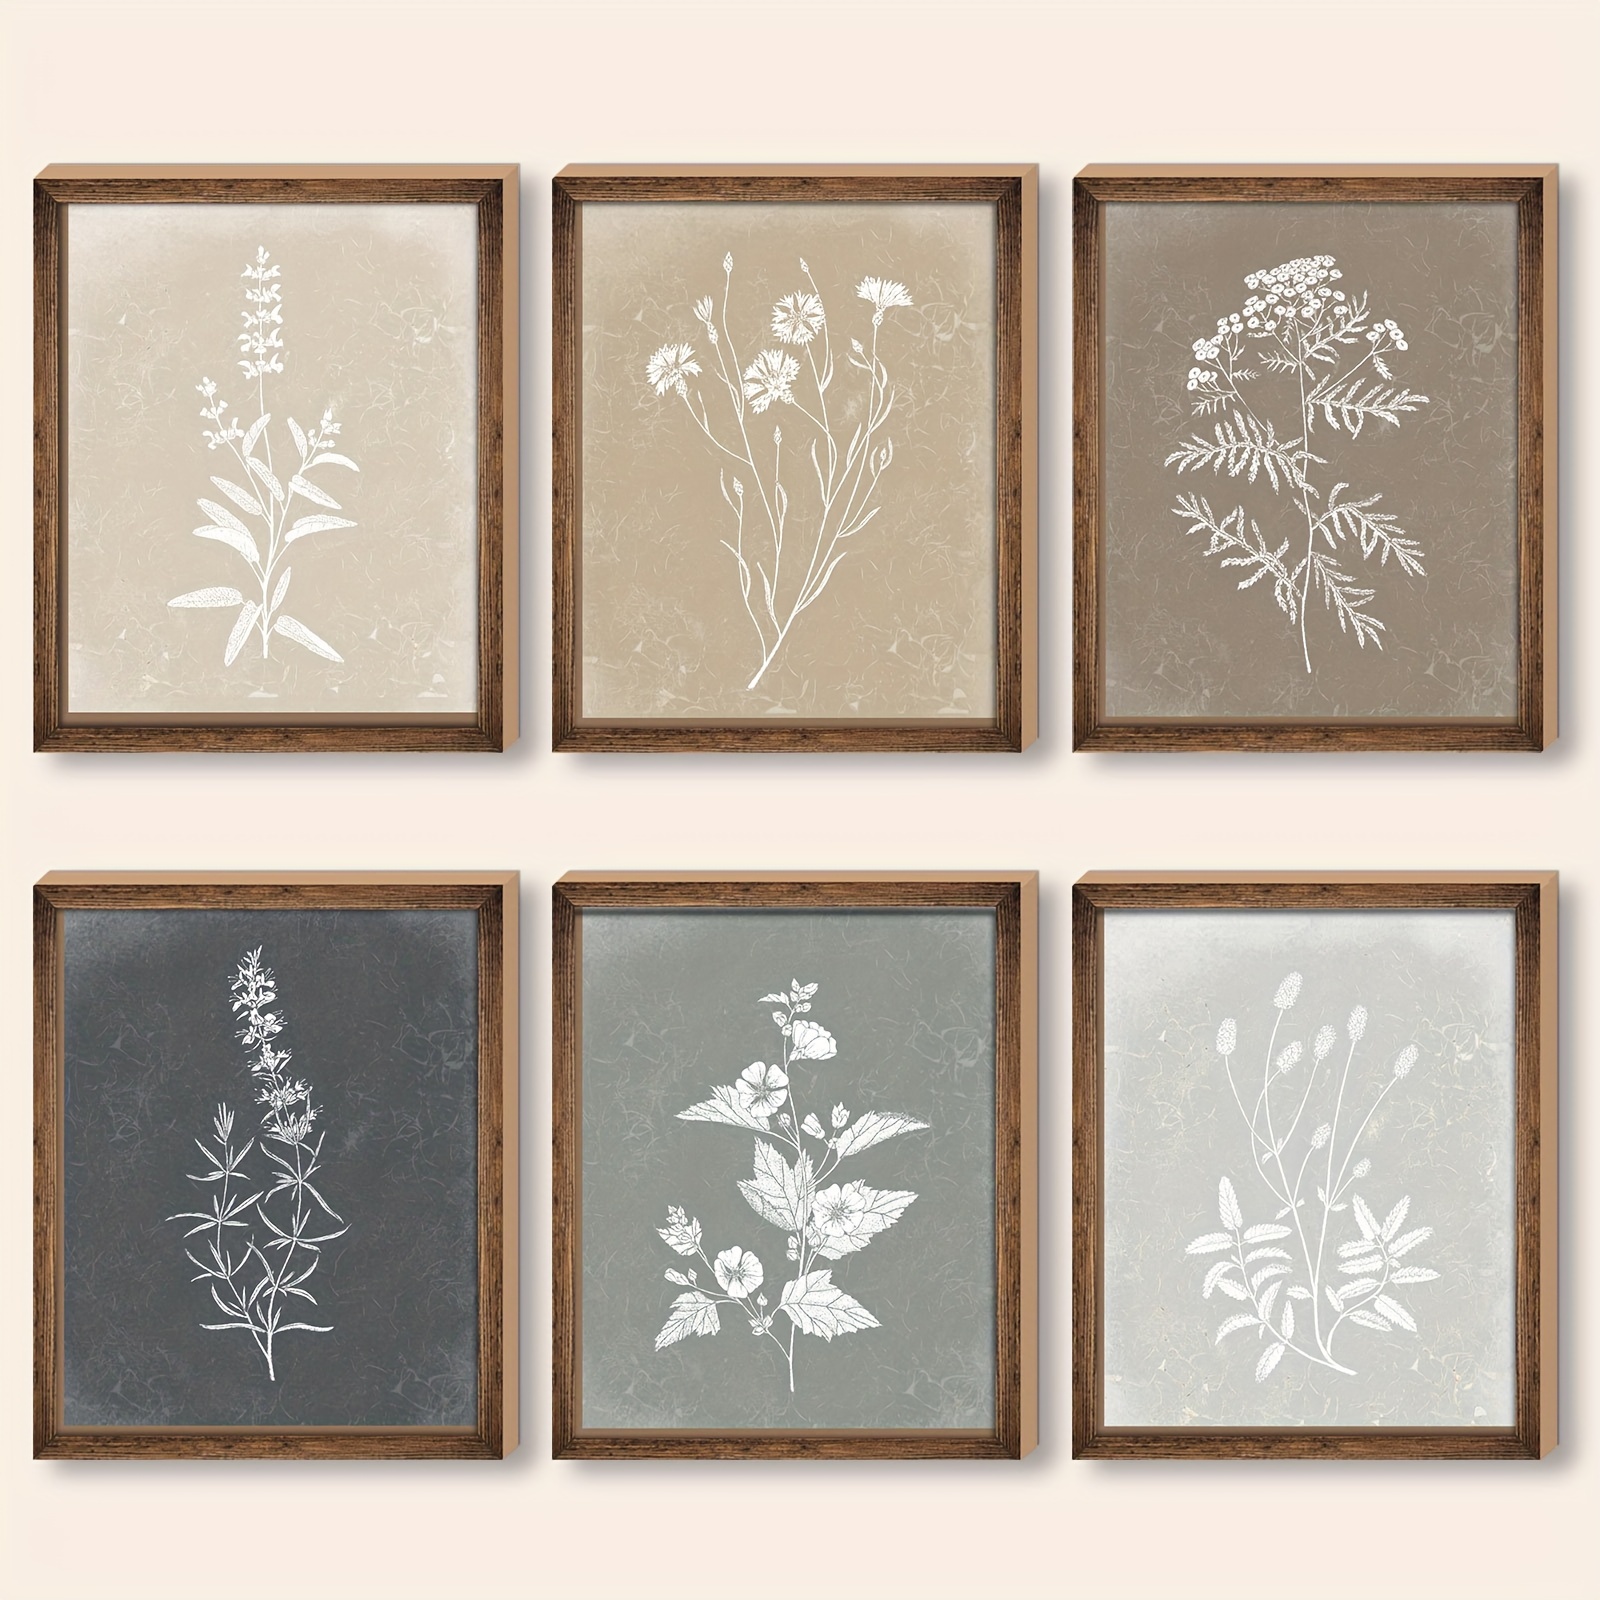 

6 Pack Framed Wall Art Set Minimalist Plant Print Wall Decor Rustic Vintage Floral Wall Art For Farmhouse Home Kitchen Wall Decor, 9 X 11 In (vivid Giclee)